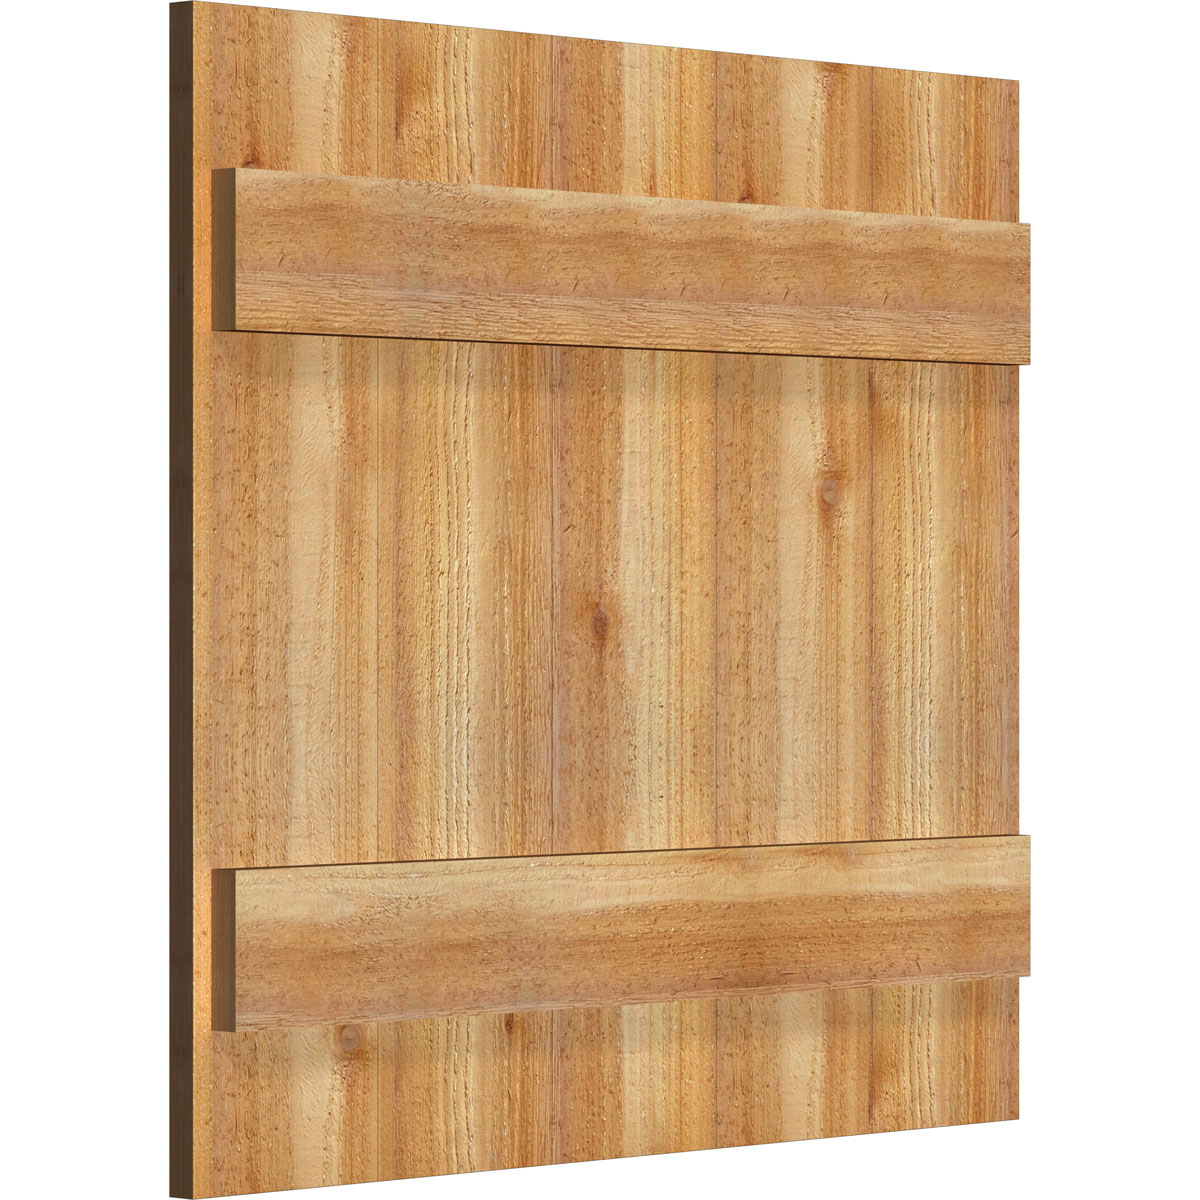 Ekena Millwork 2-Pack 26.875-in W x 25-in H Unfinished Board and Batten Wood Western Red cedar Exterior Shutters